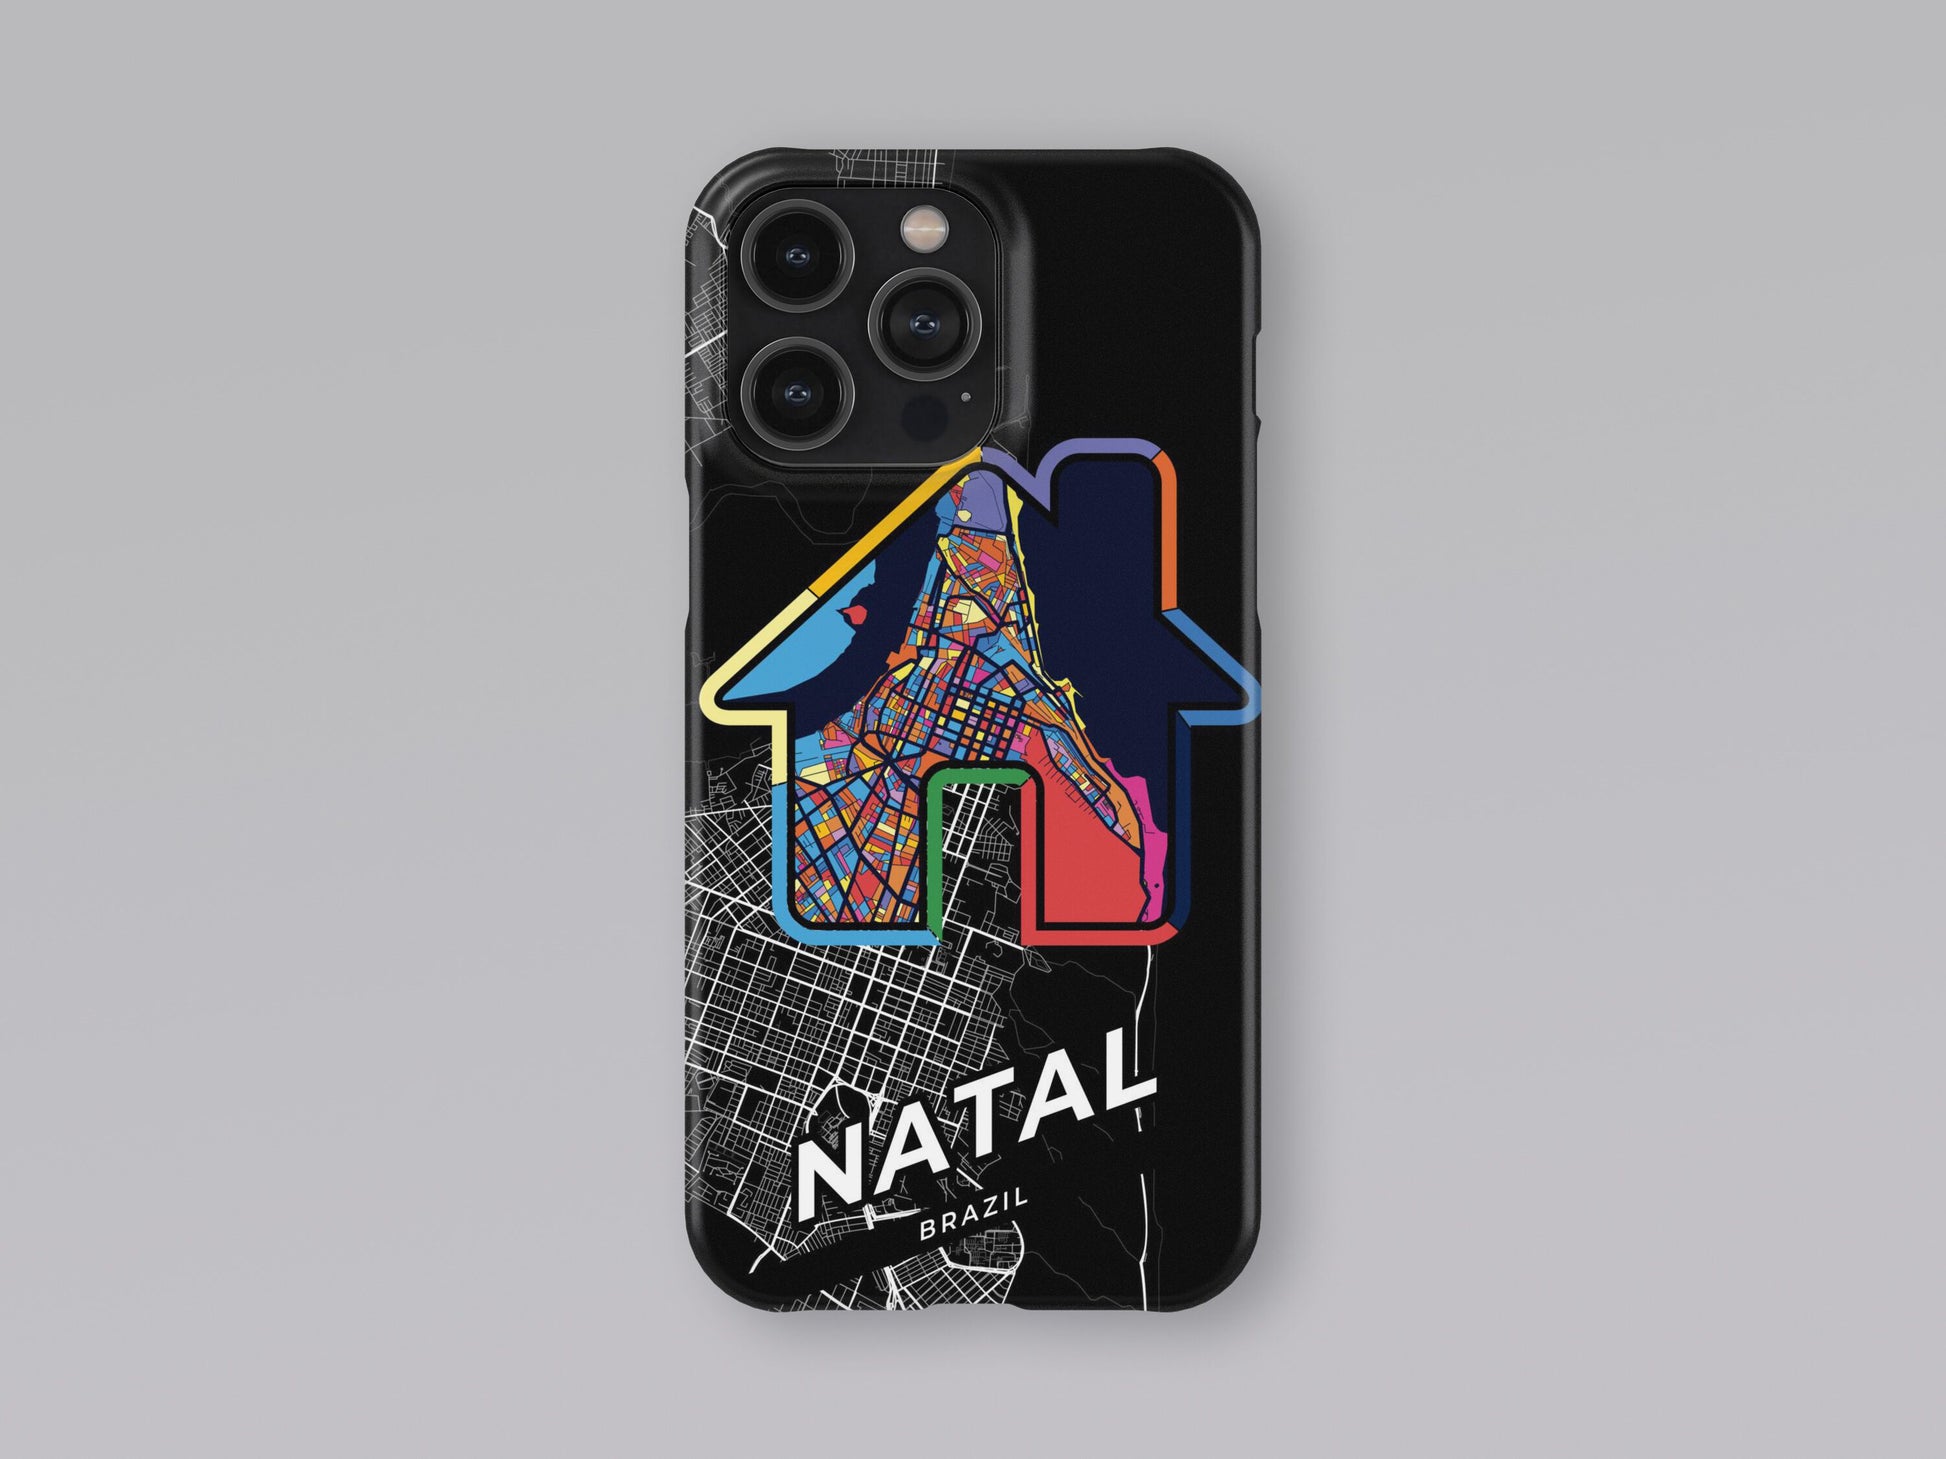 Natal Brazil slim phone case with colorful icon 3